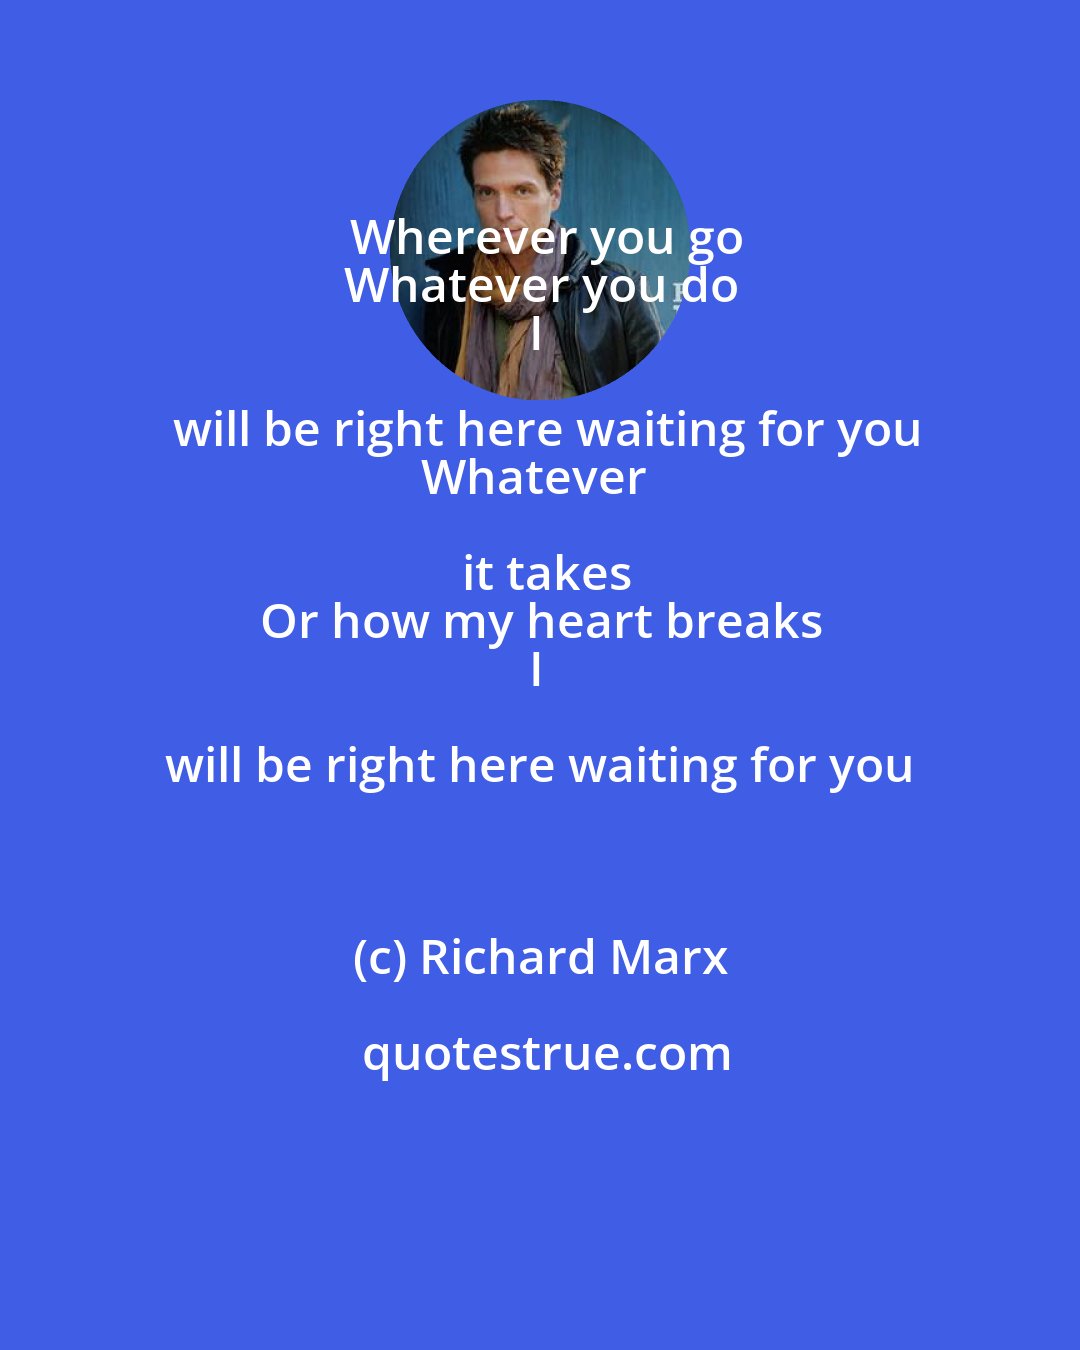 Richard Marx: Wherever you go
Whatever you do
I will be right here waiting for you
Whatever it takes
Or how my heart breaks
I will be right here waiting for you